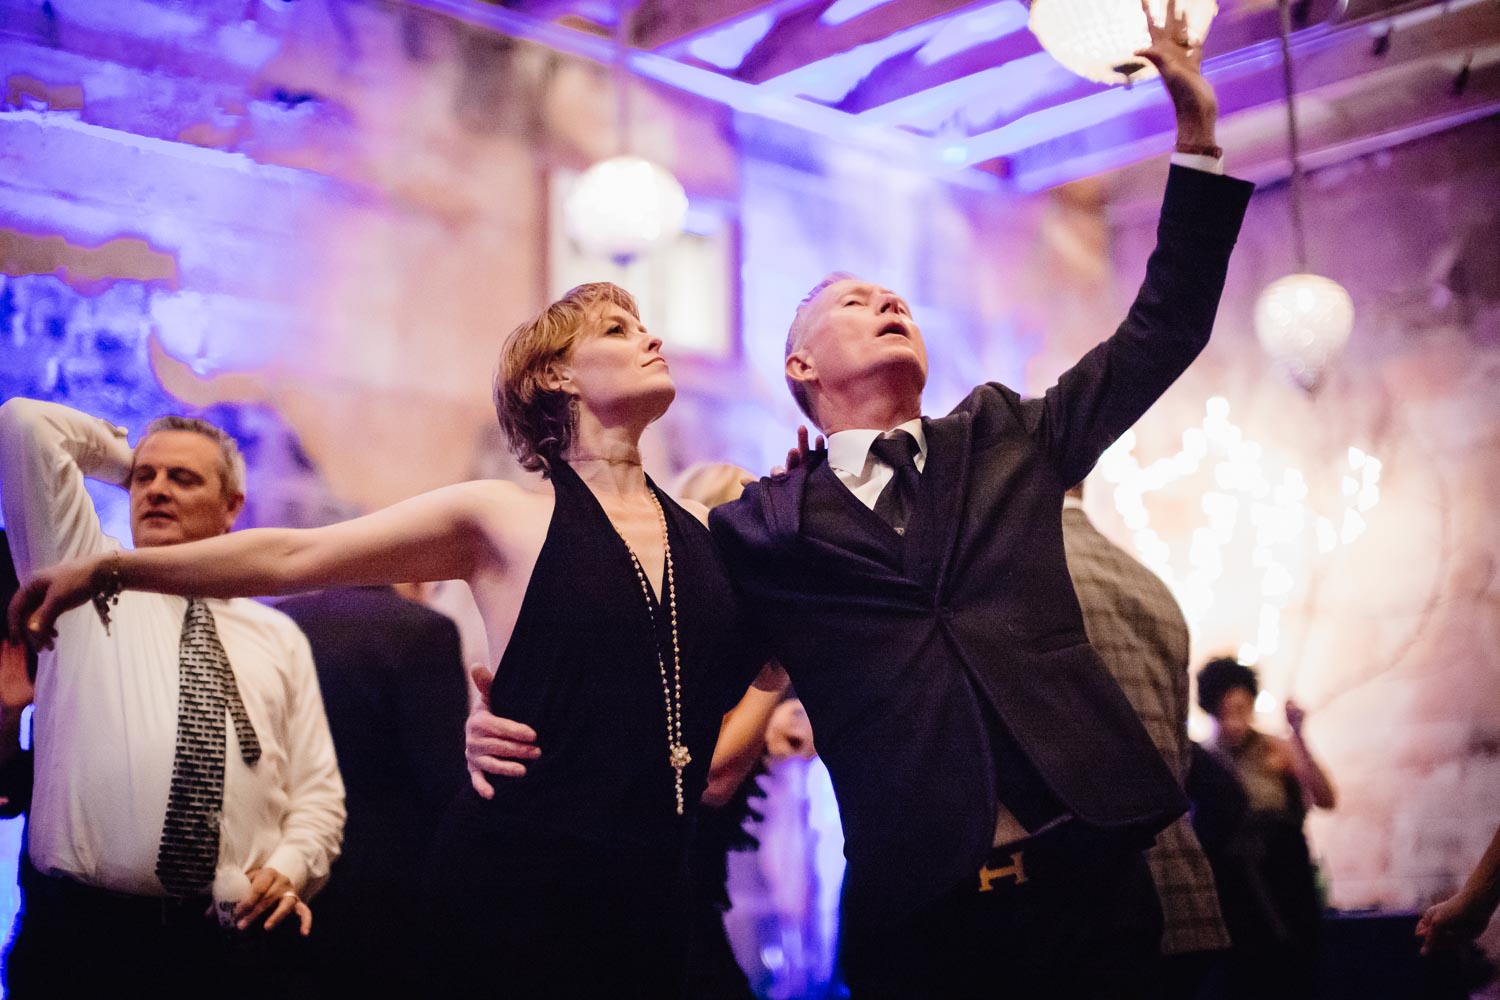 A guest and the groom dance at a wedding receptionLM104975